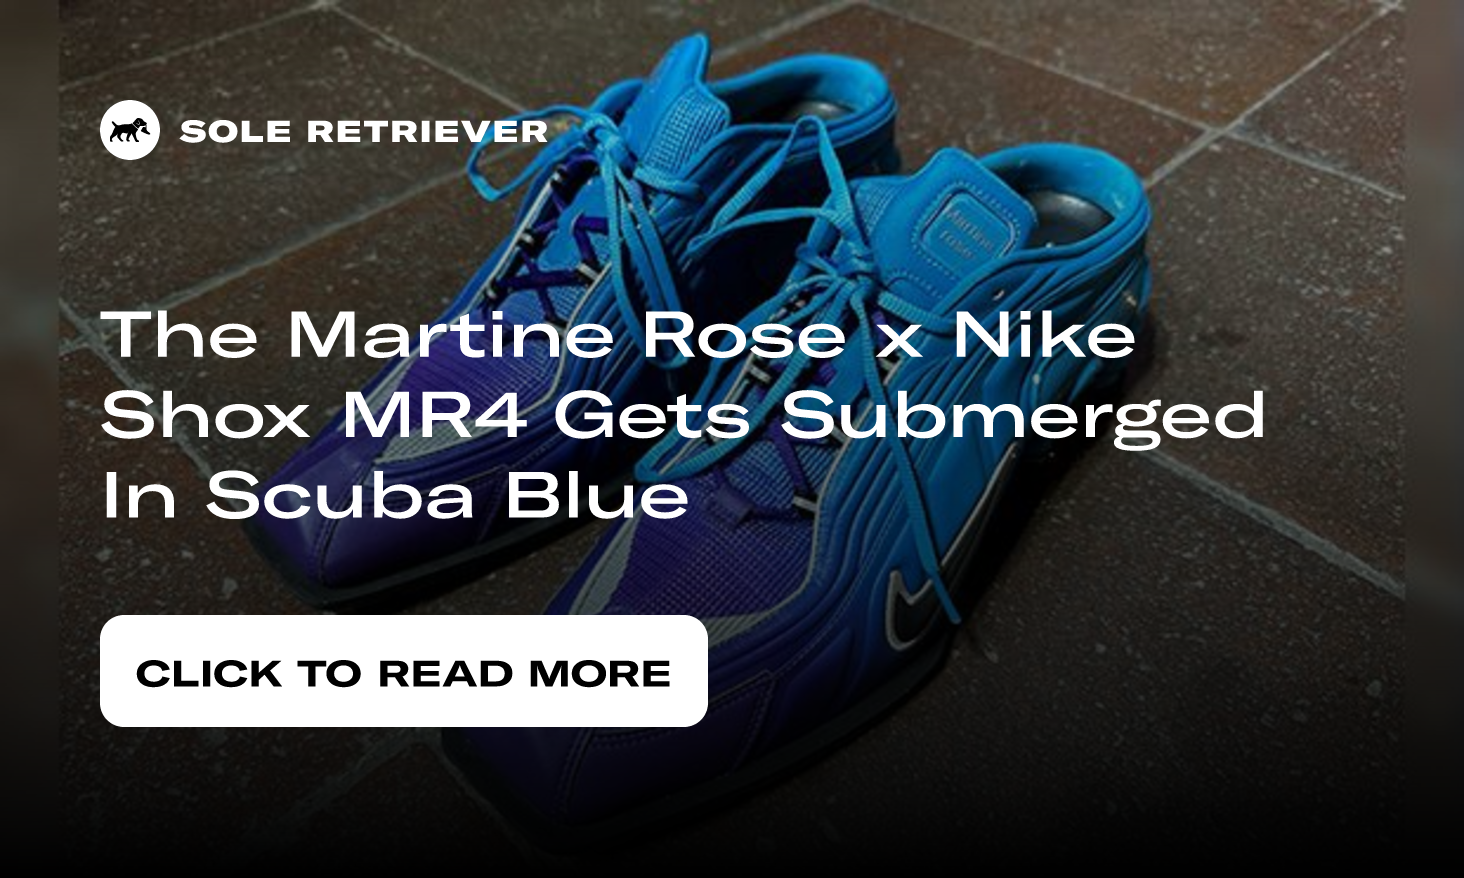 EXCLUSIVE: New Martine Rose x Nike Shox MR4 at Pitti